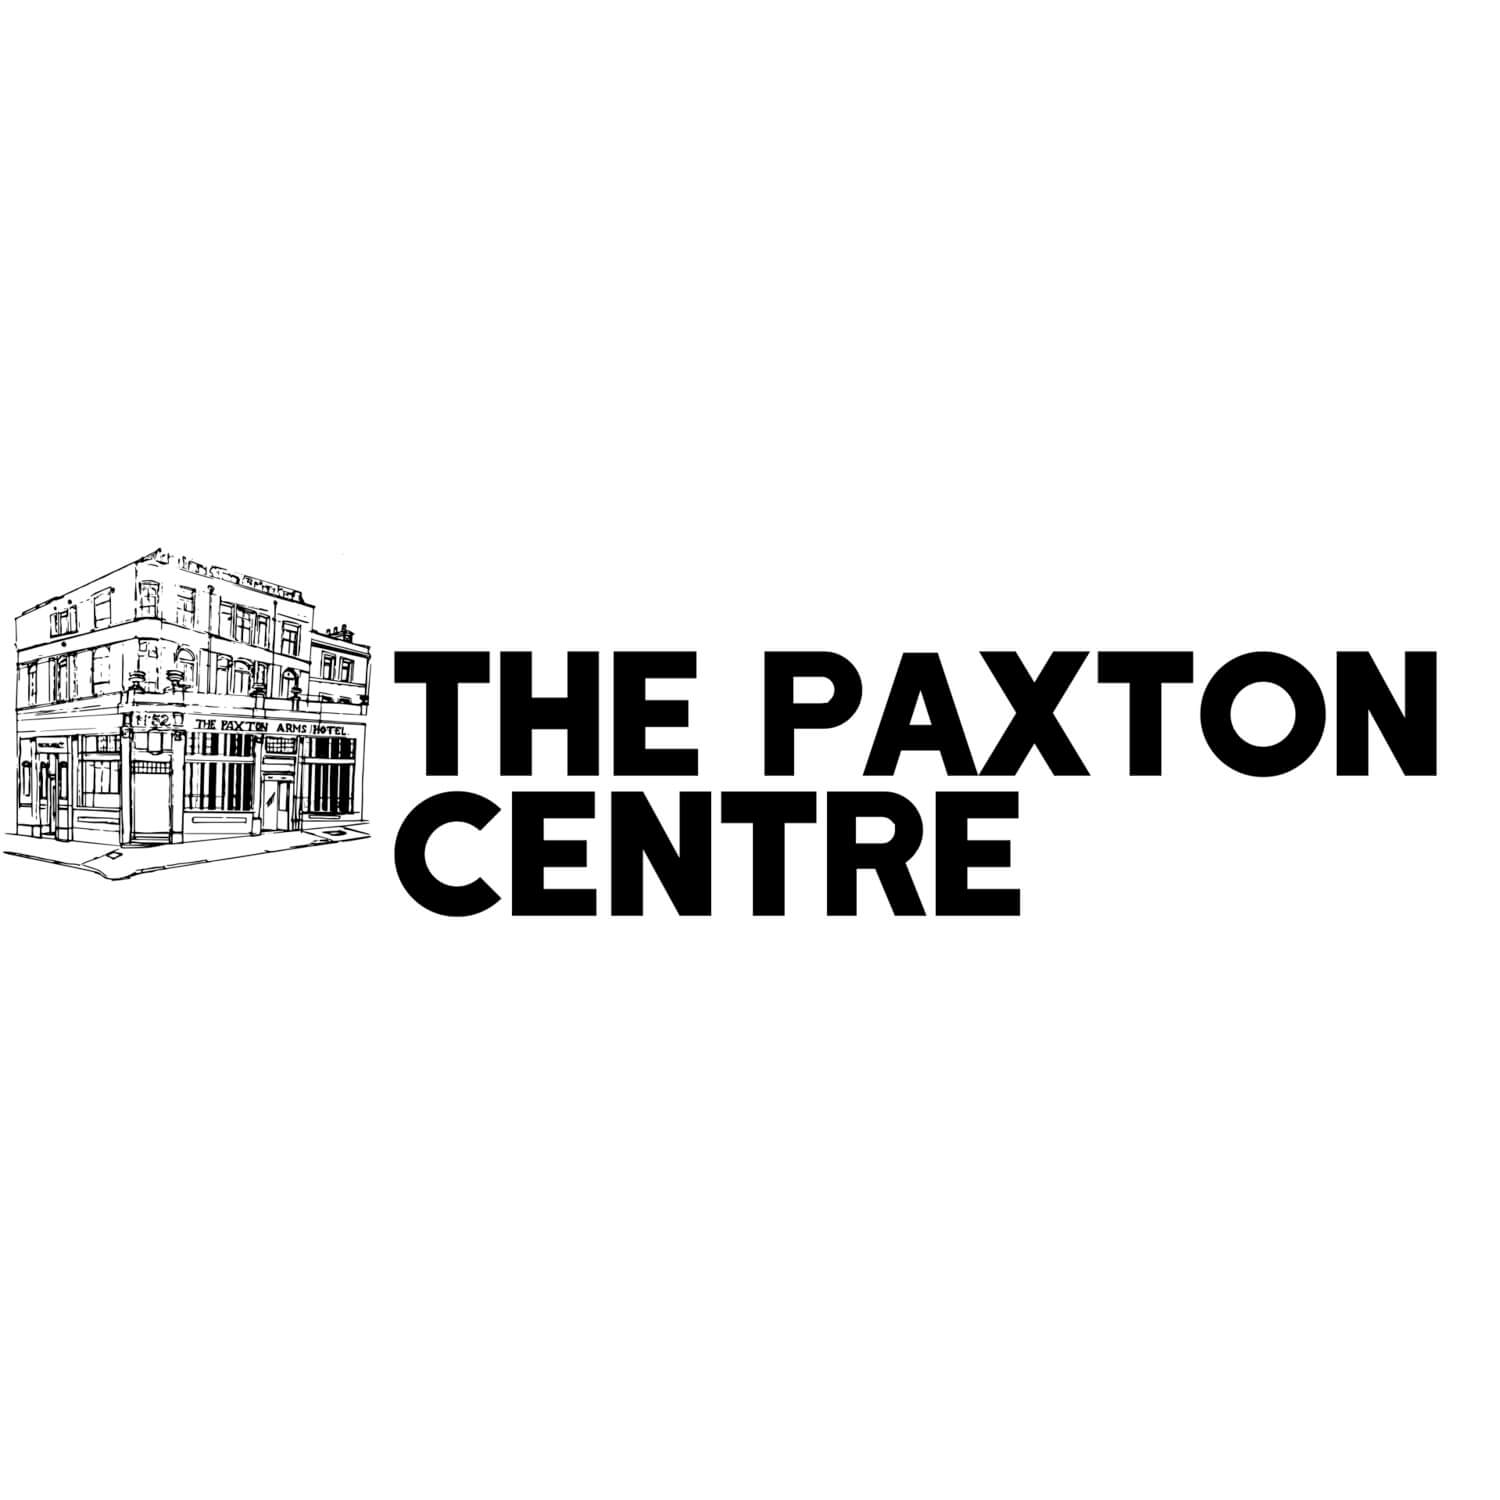 The Paxton Centre